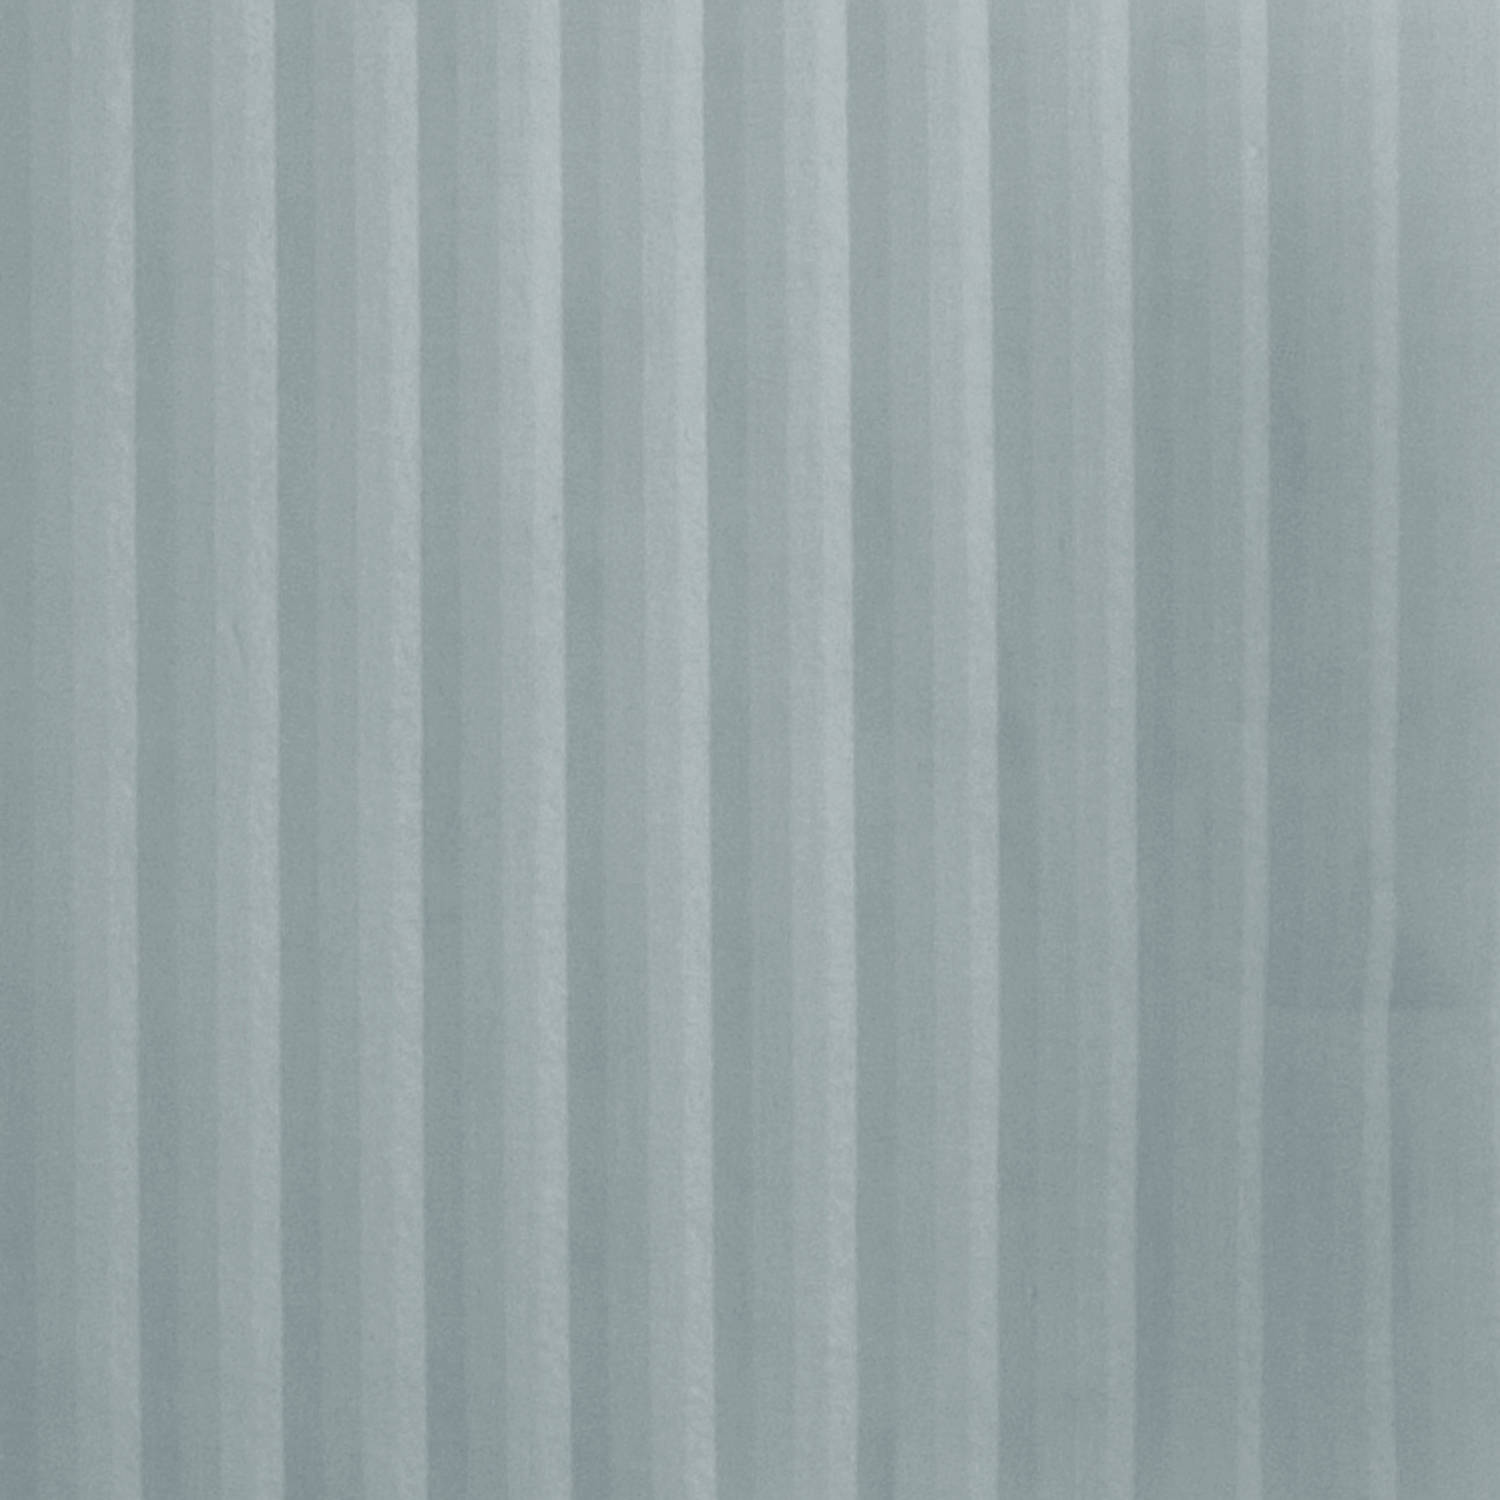 Better Homes and Gardens Elise Woven Stripe Sheer Window Panel Collection - image 2 of 2